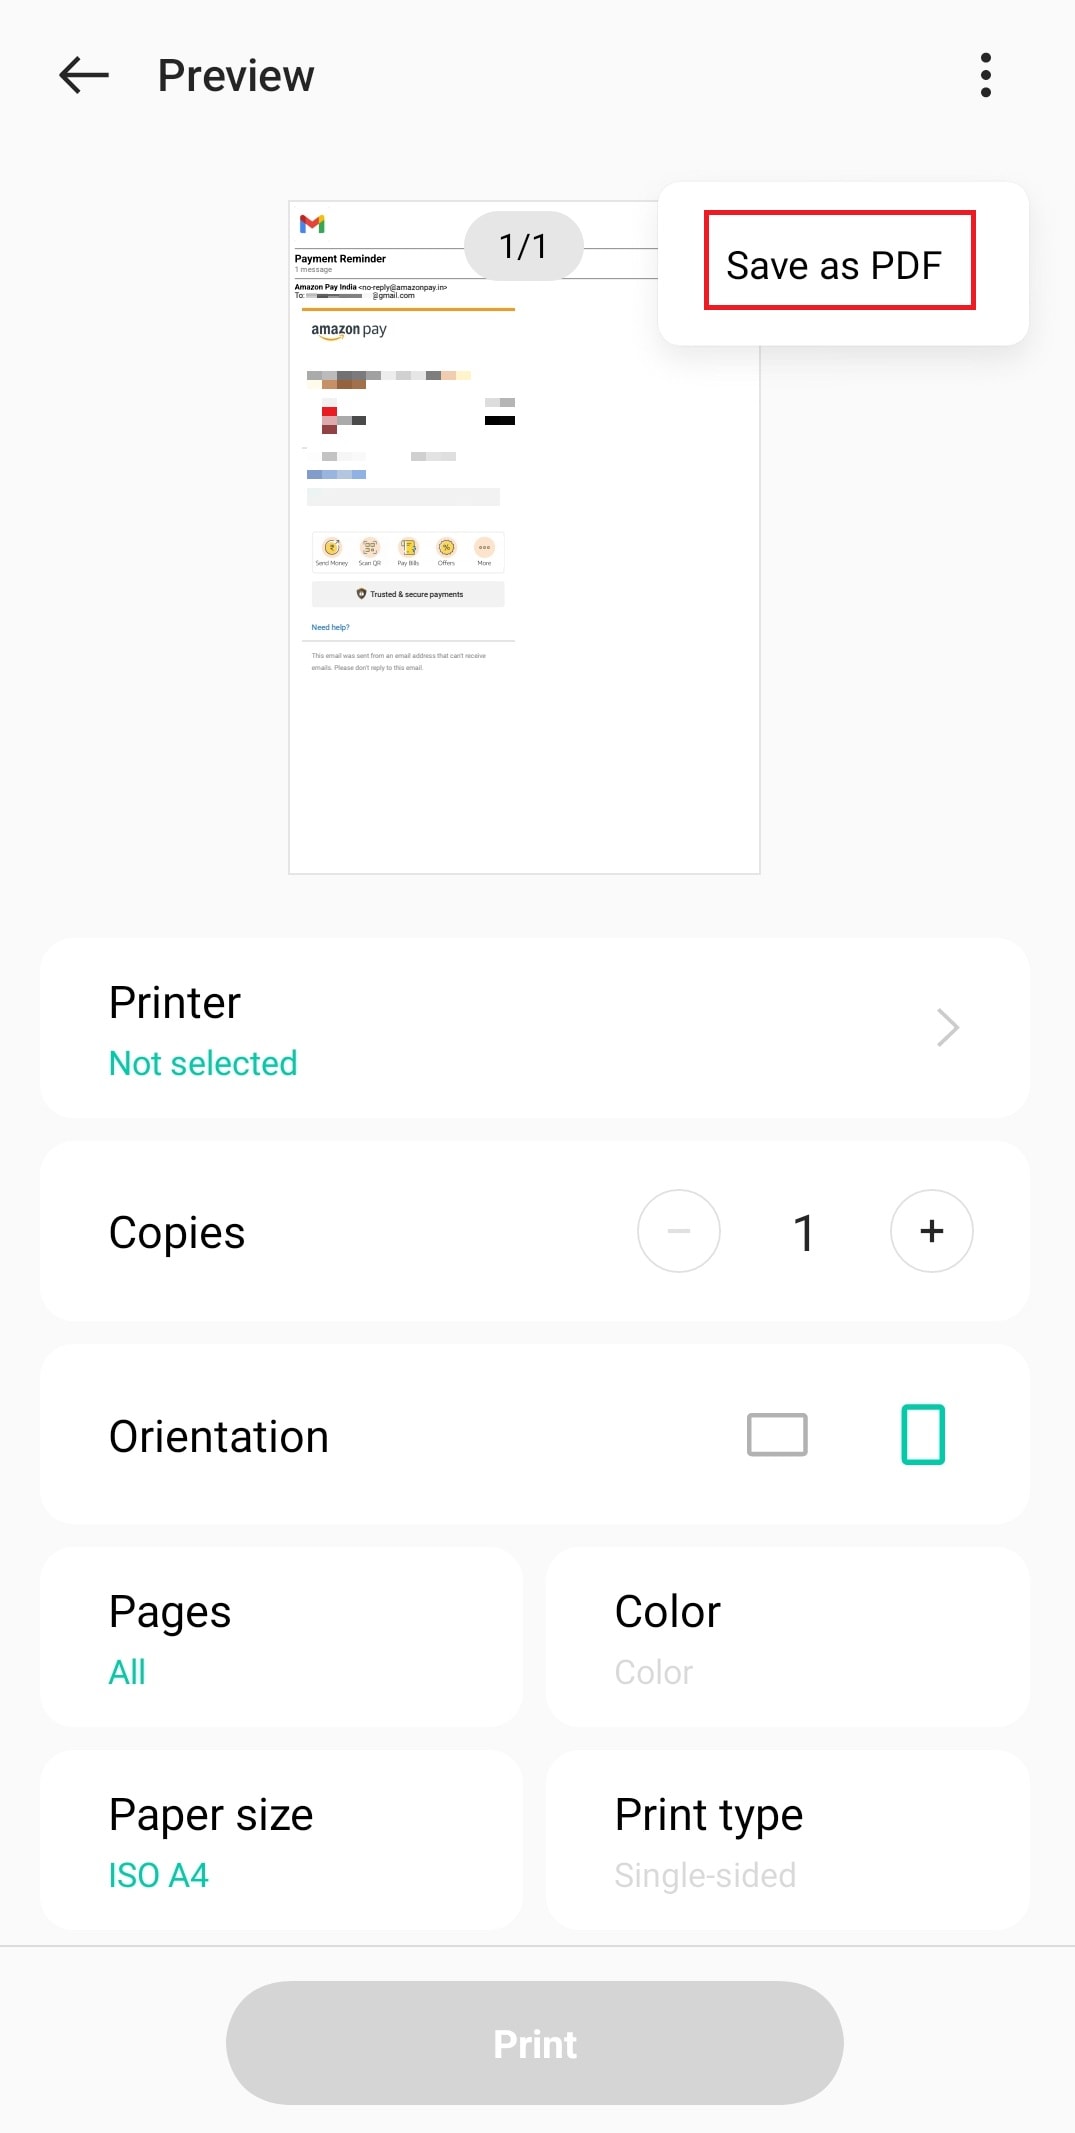 choose Save as PDF | print an email from my phone